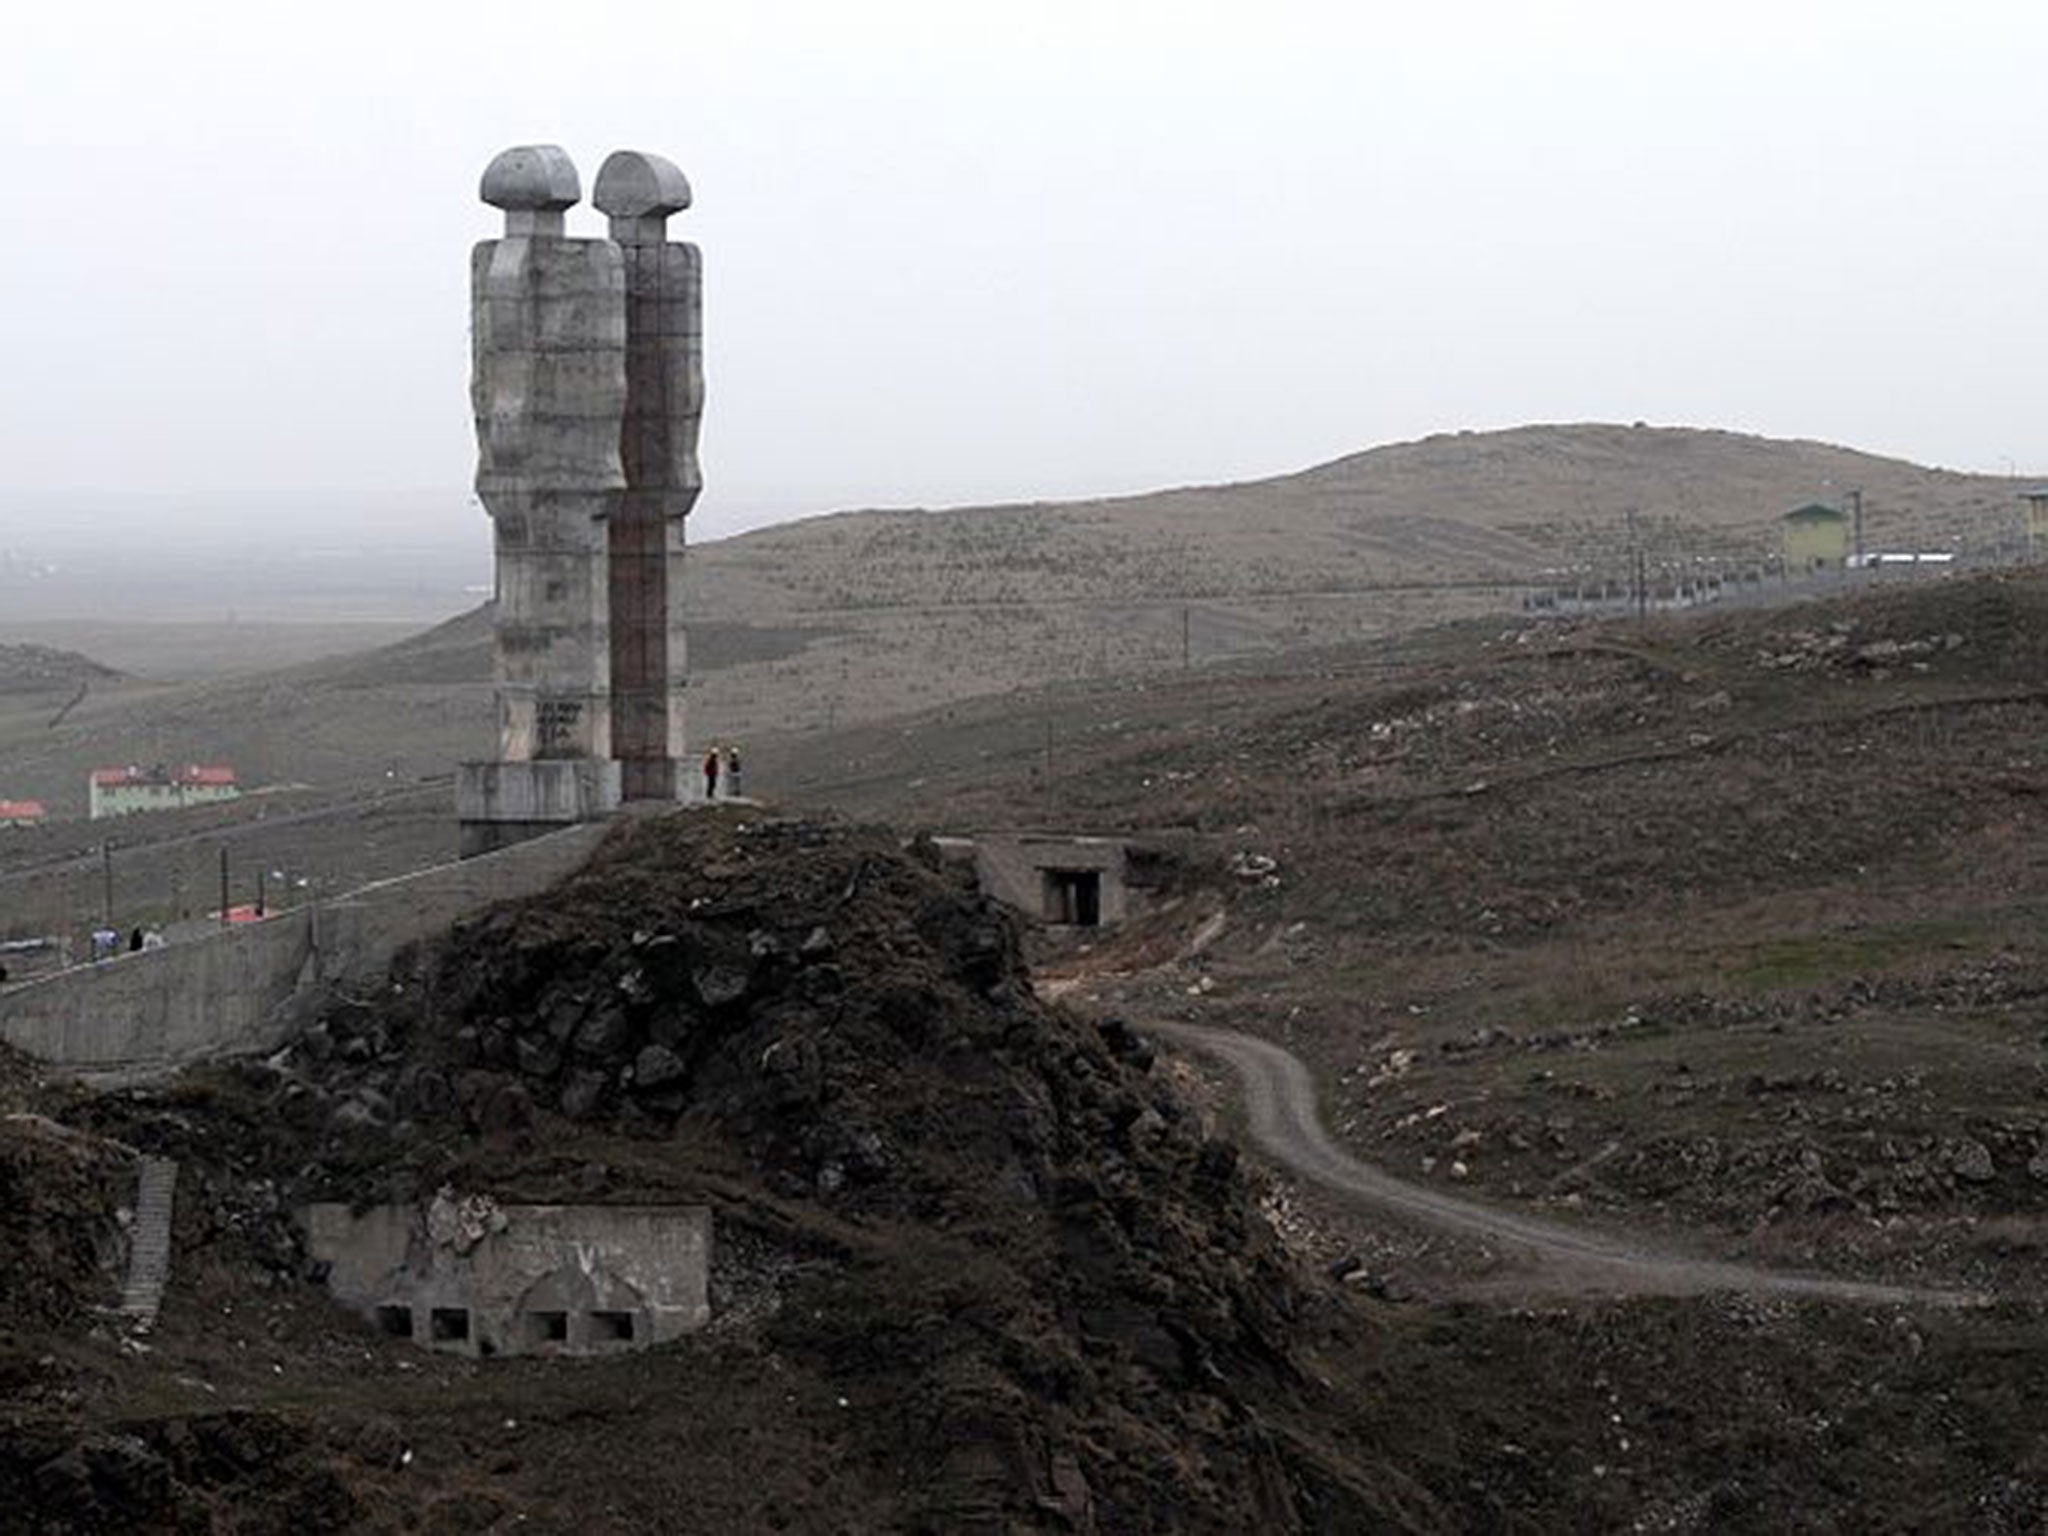 Mehmet Aksoy's Monument to Humanity when it was under construction 